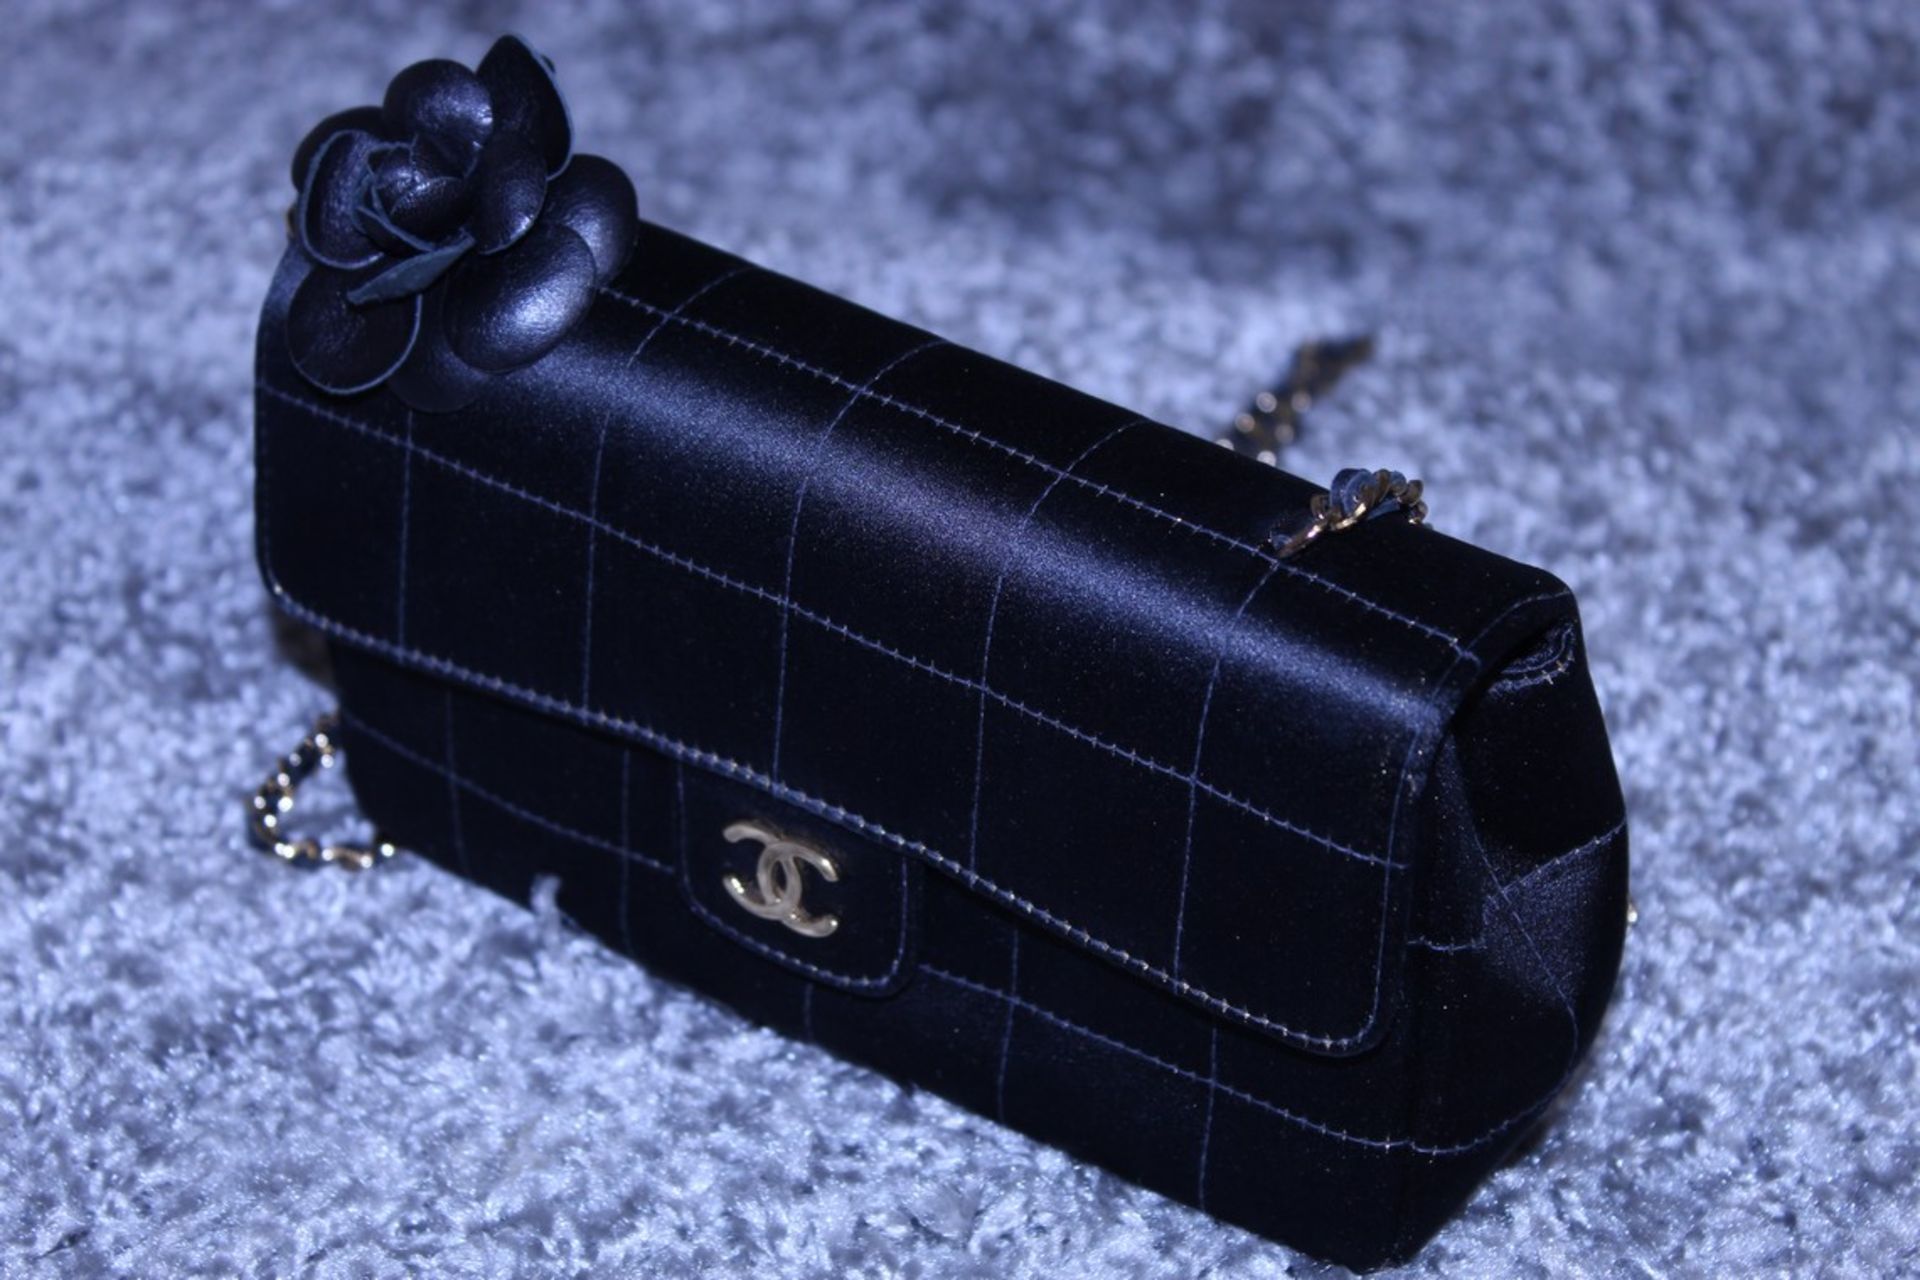 Rrp £3,500 Chanel Timess Silk Bag, Black Canvas Square Quilted, Gold Chain Handles (Production - Image 3 of 4